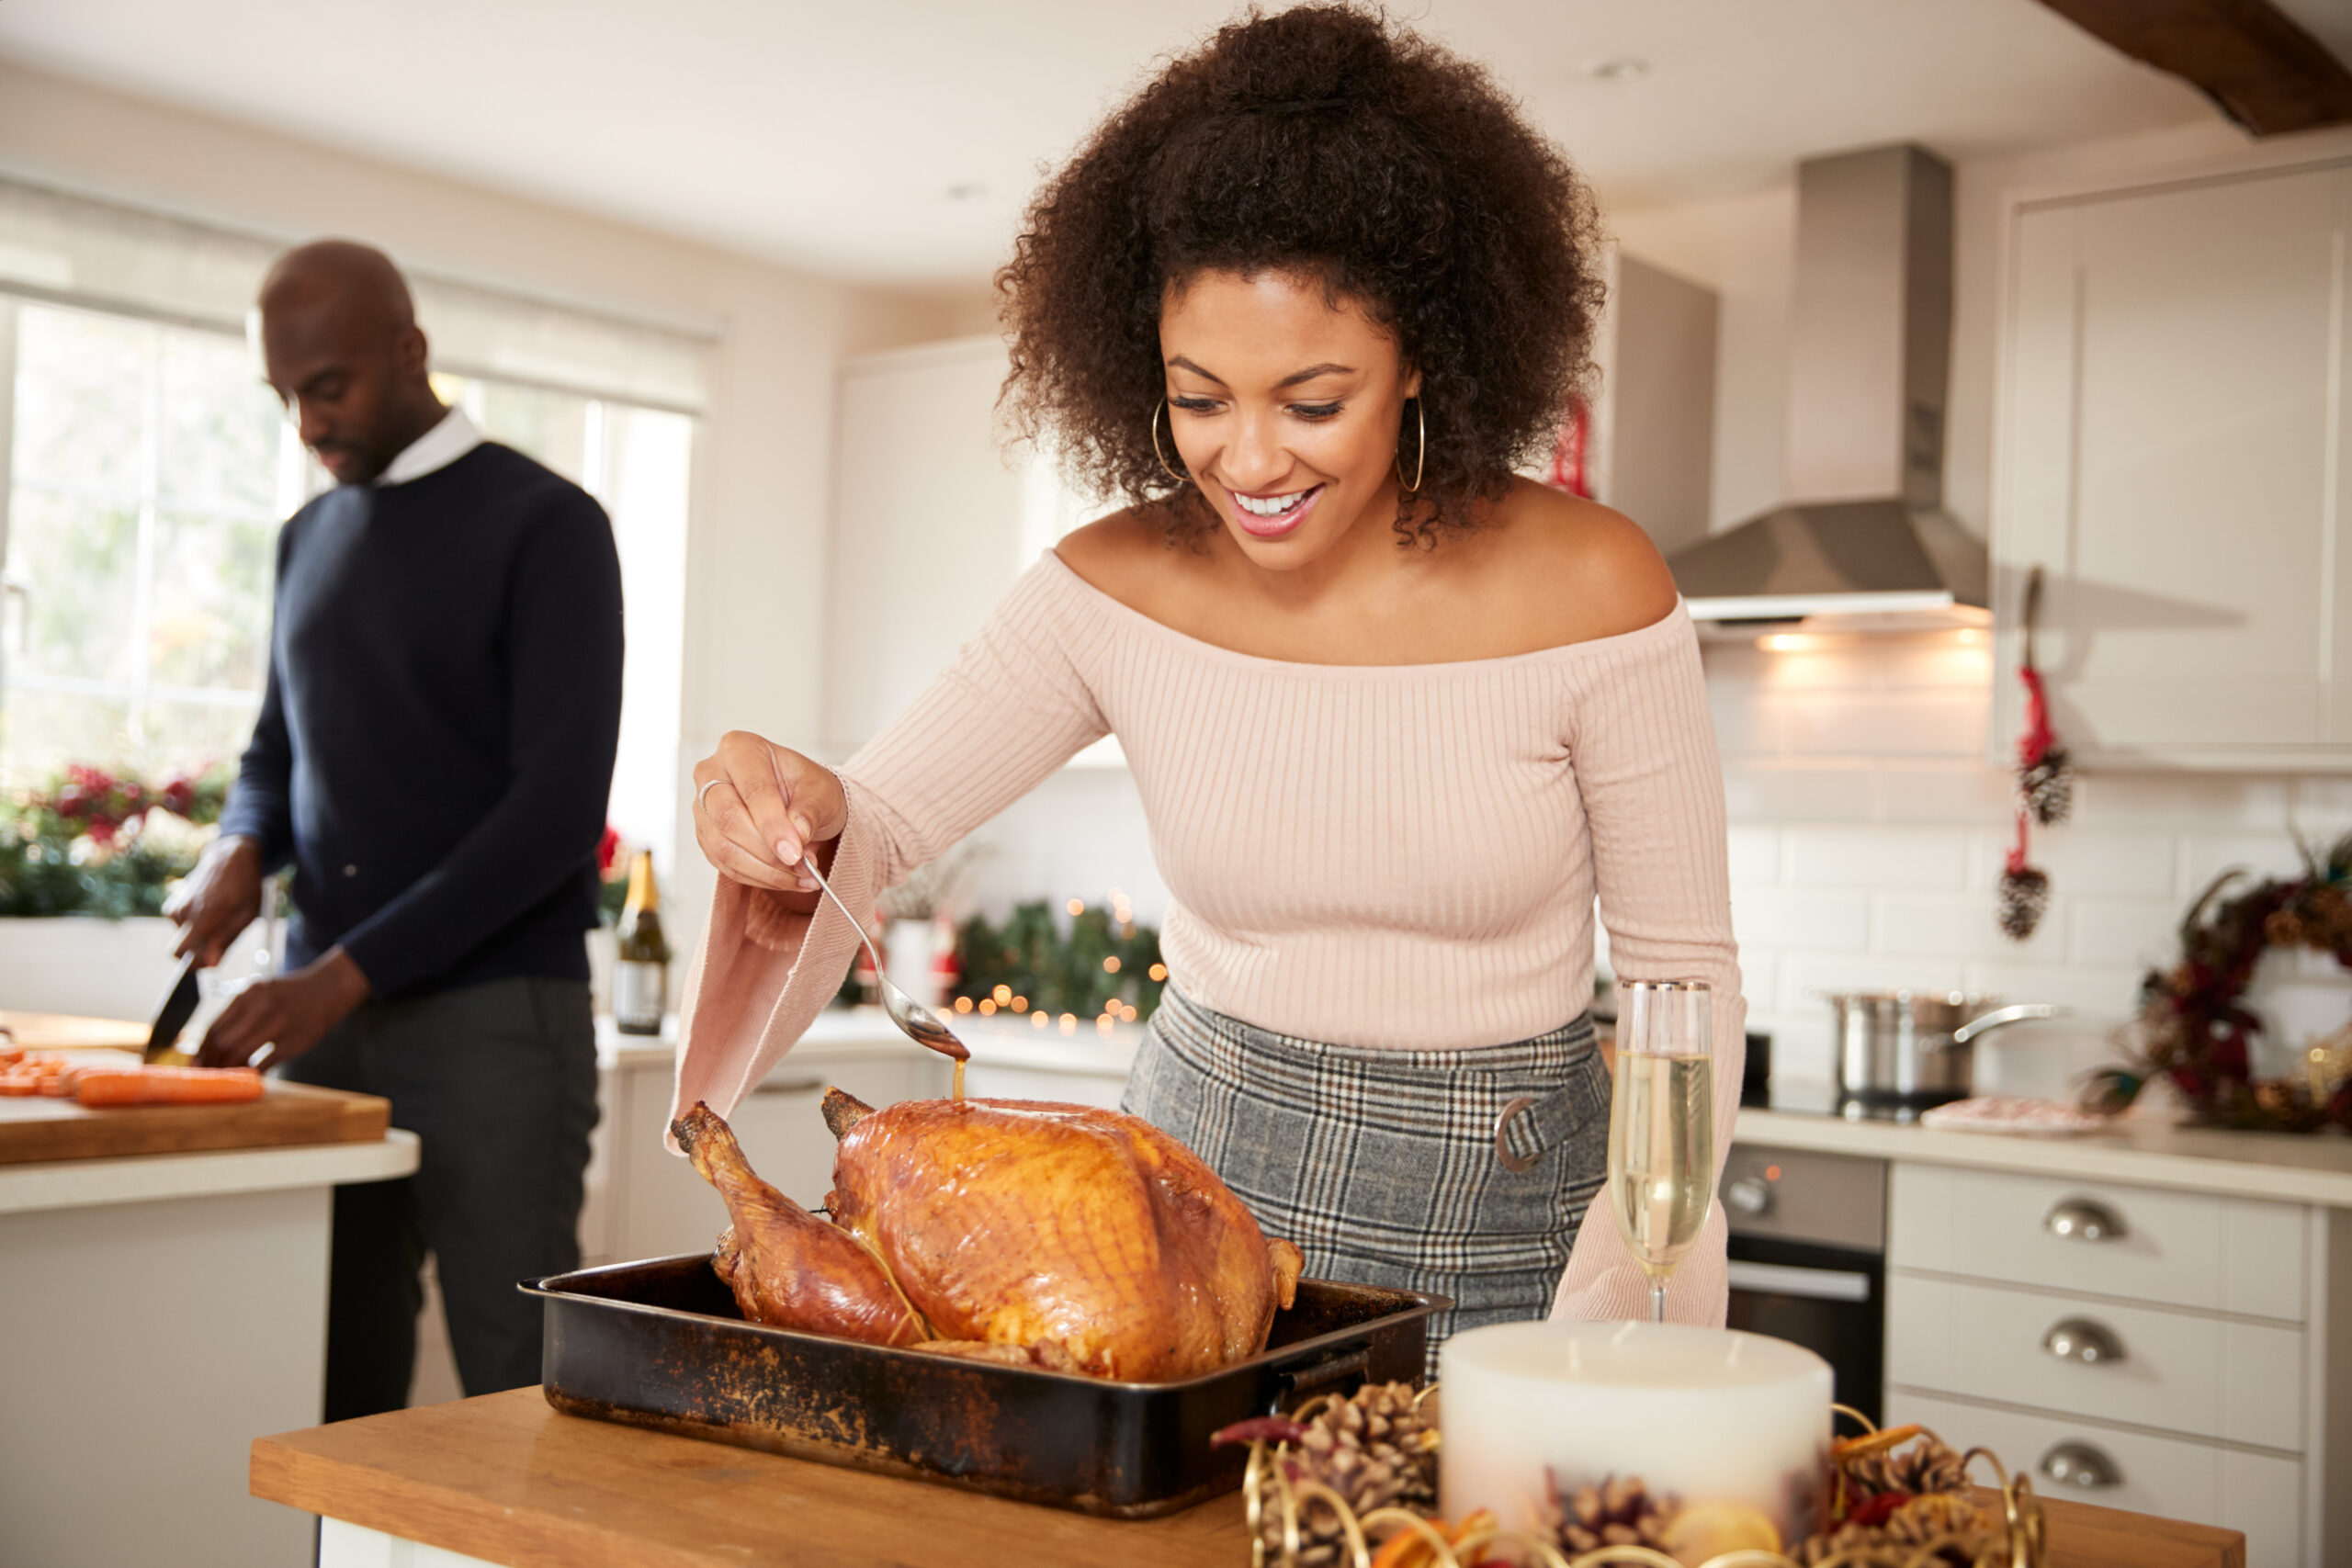 An African American woman seasons a turkey for Thanksgiving dinner